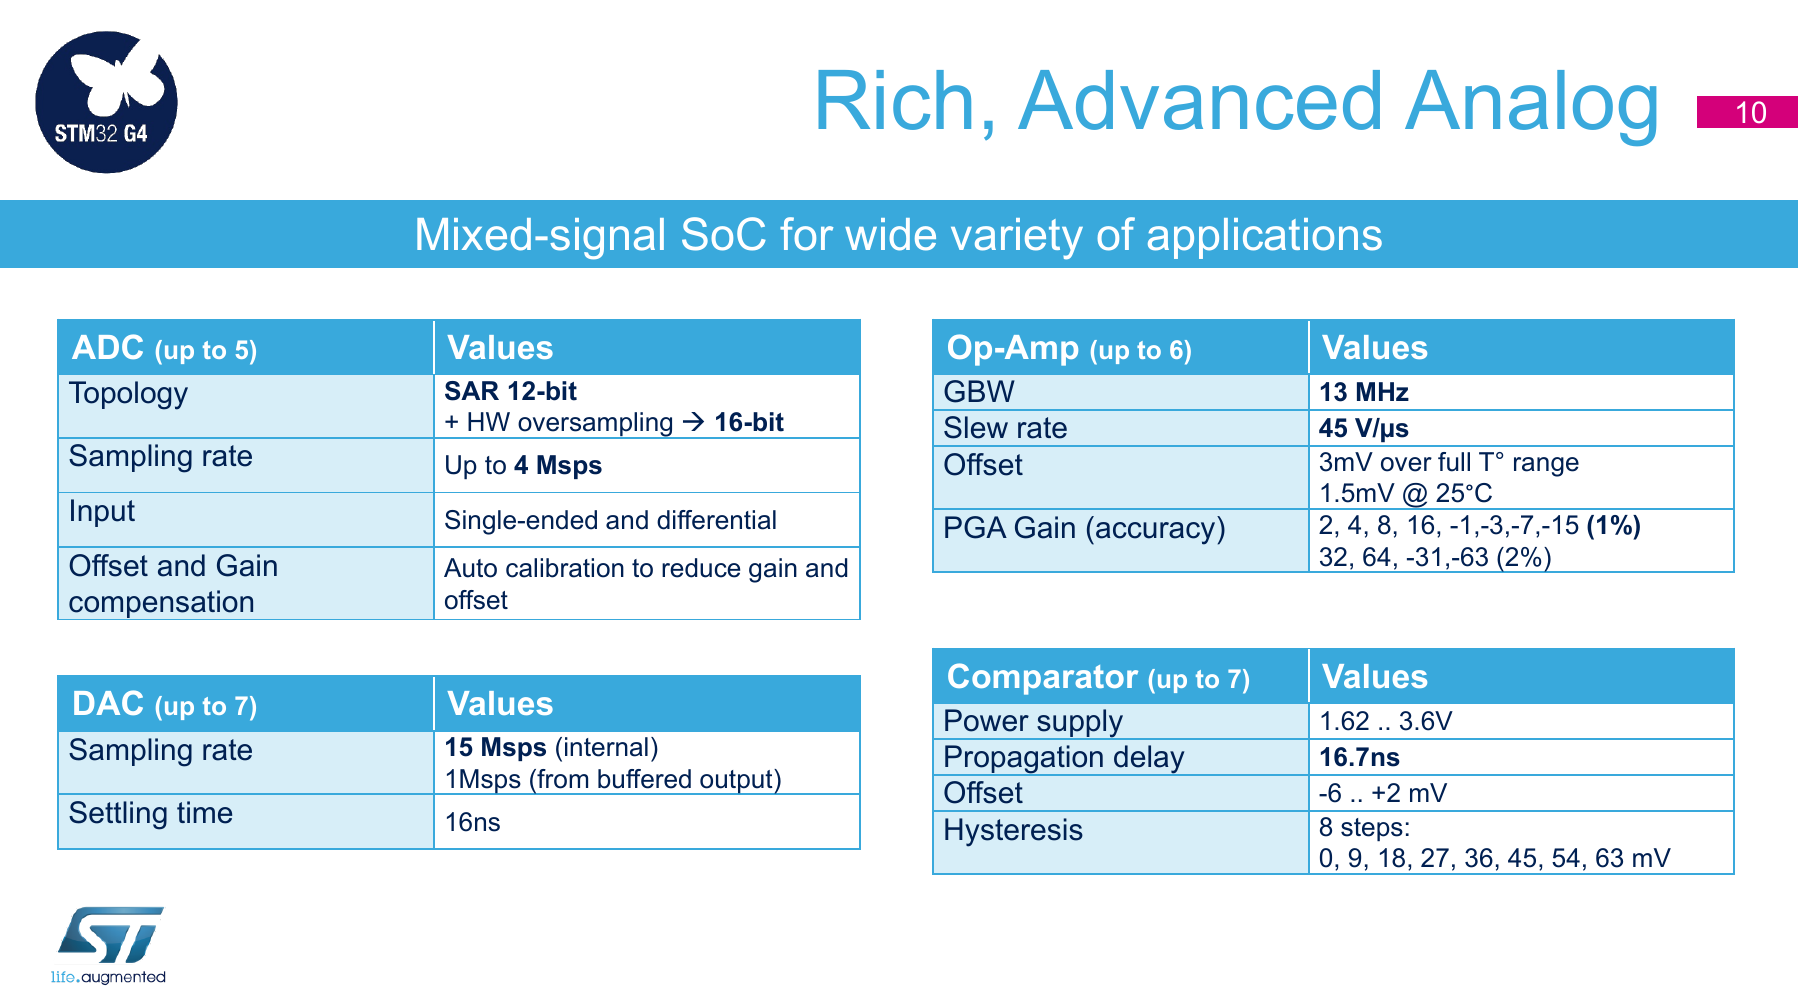 Microcontrollers_STM32G4_series_product_overview.pdf, Seite 10